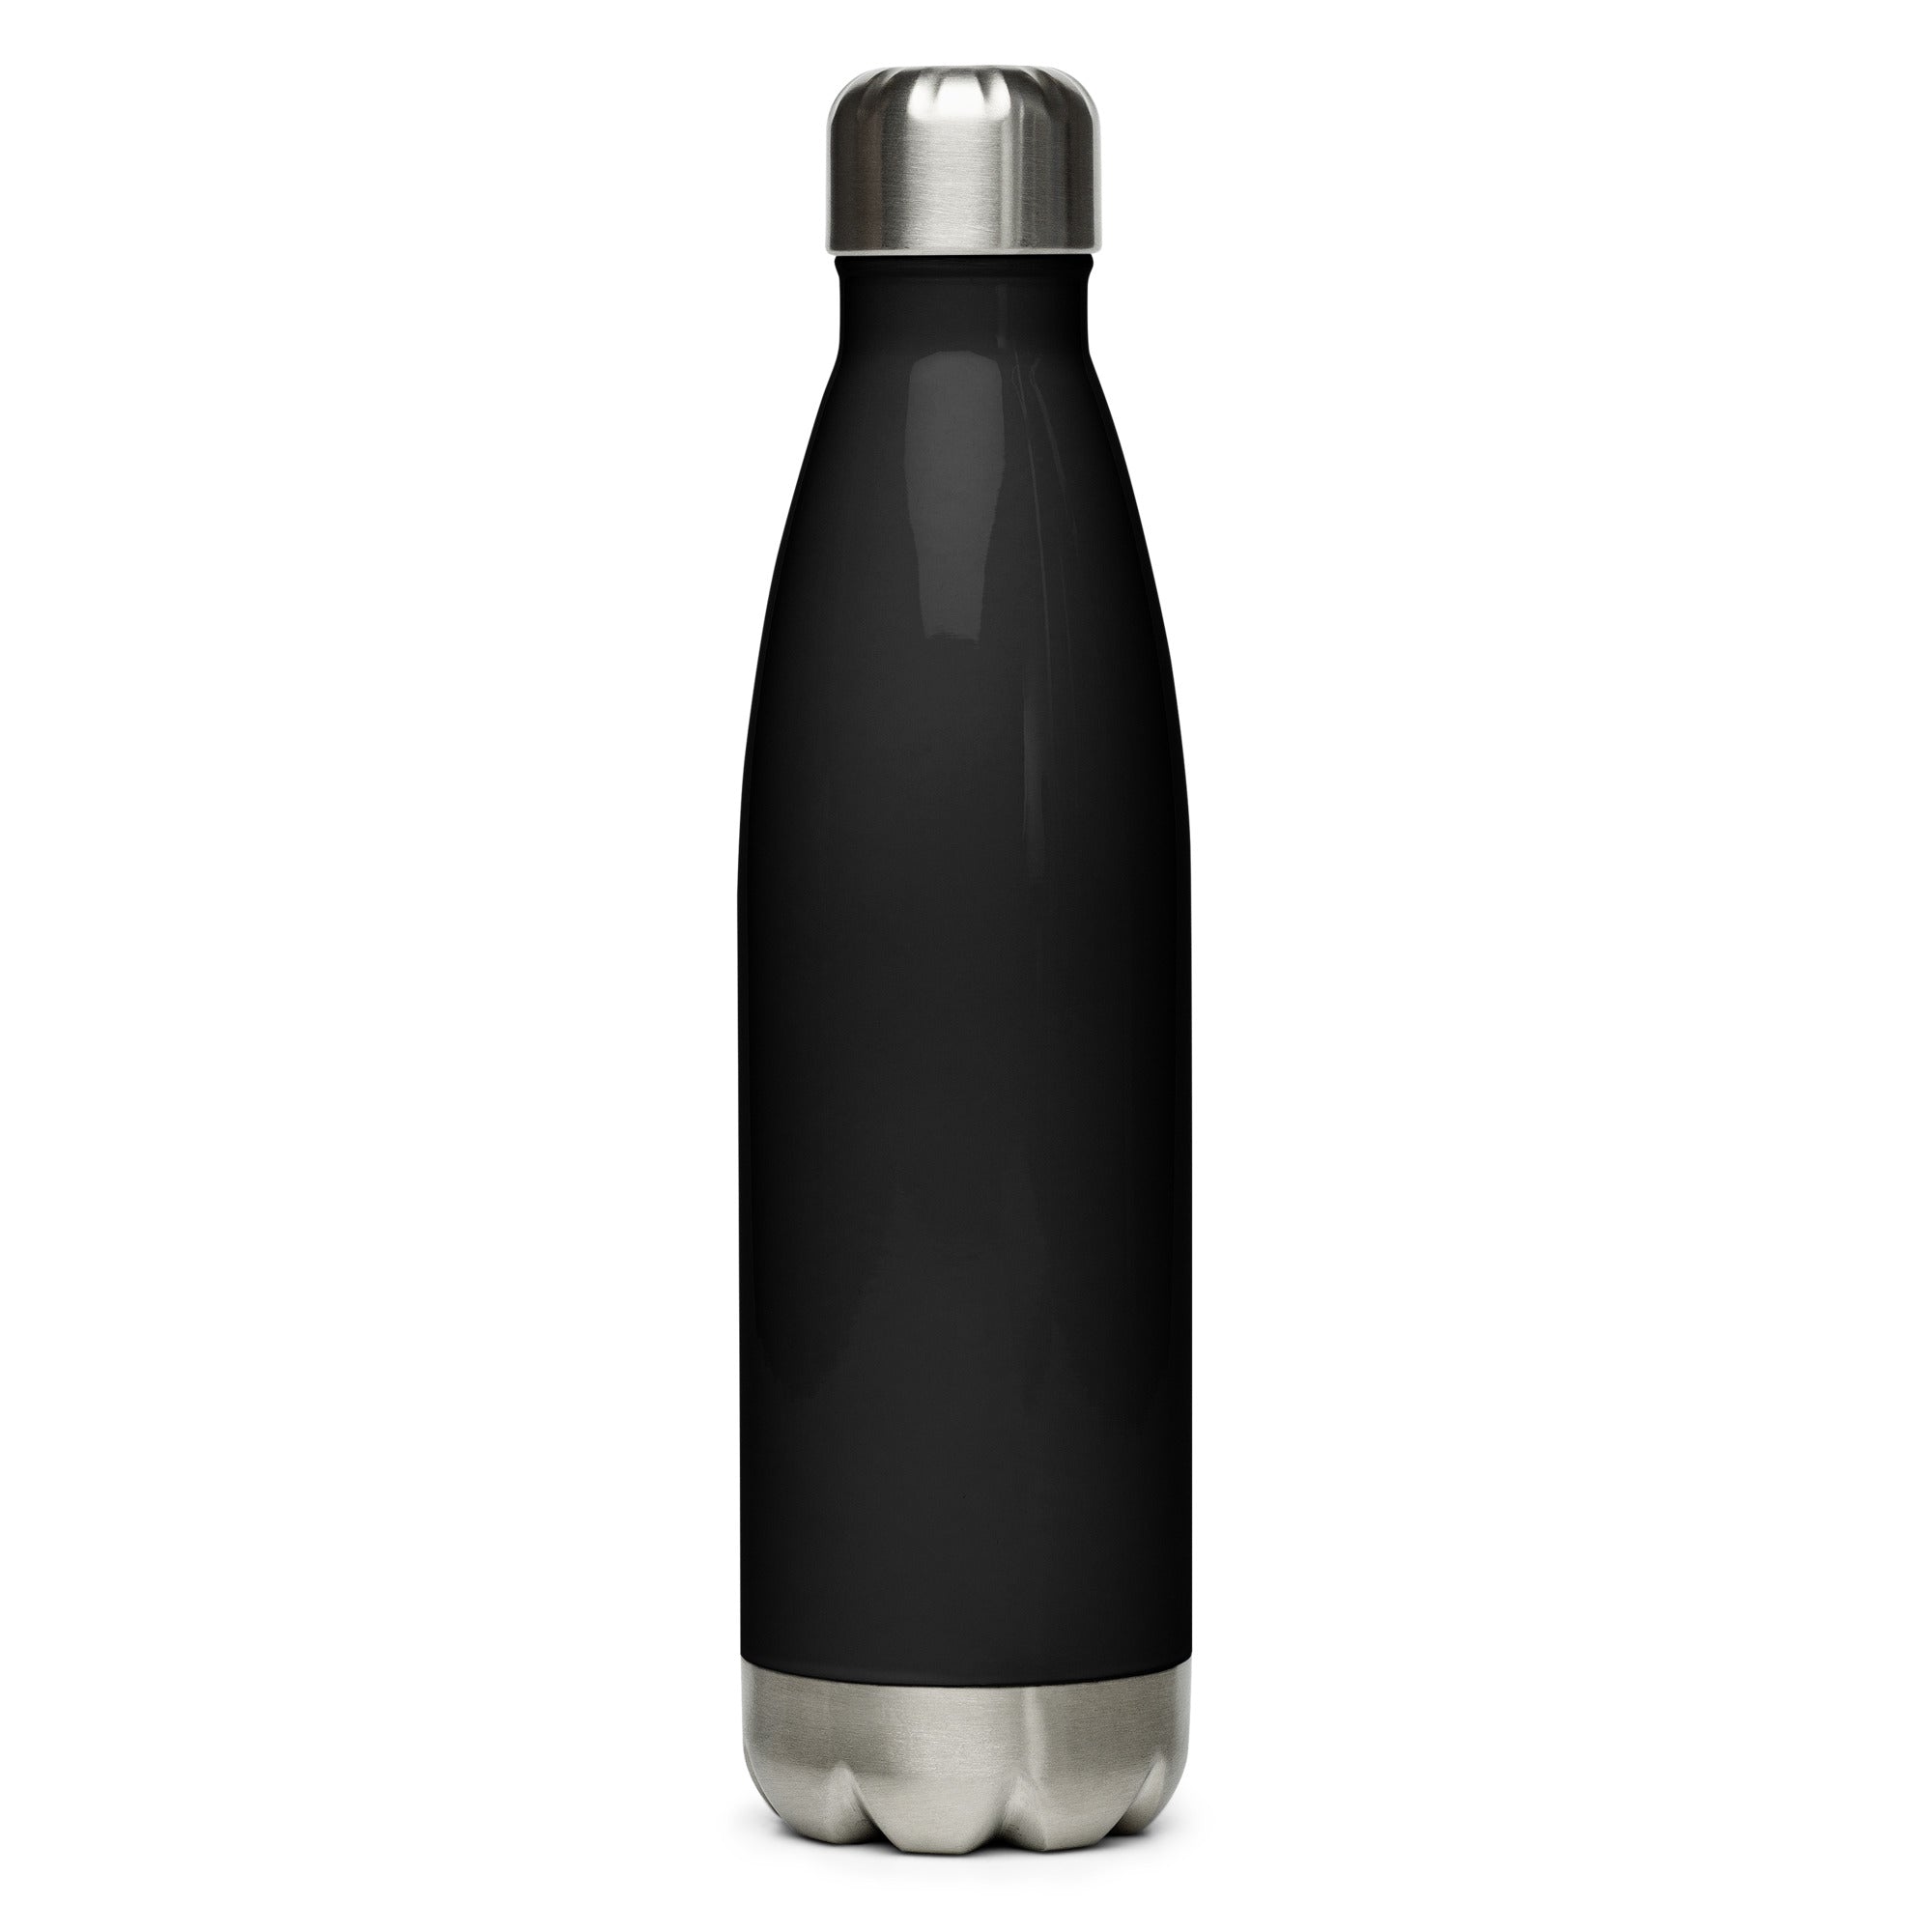 NWC Stainless Steel Water Bottle